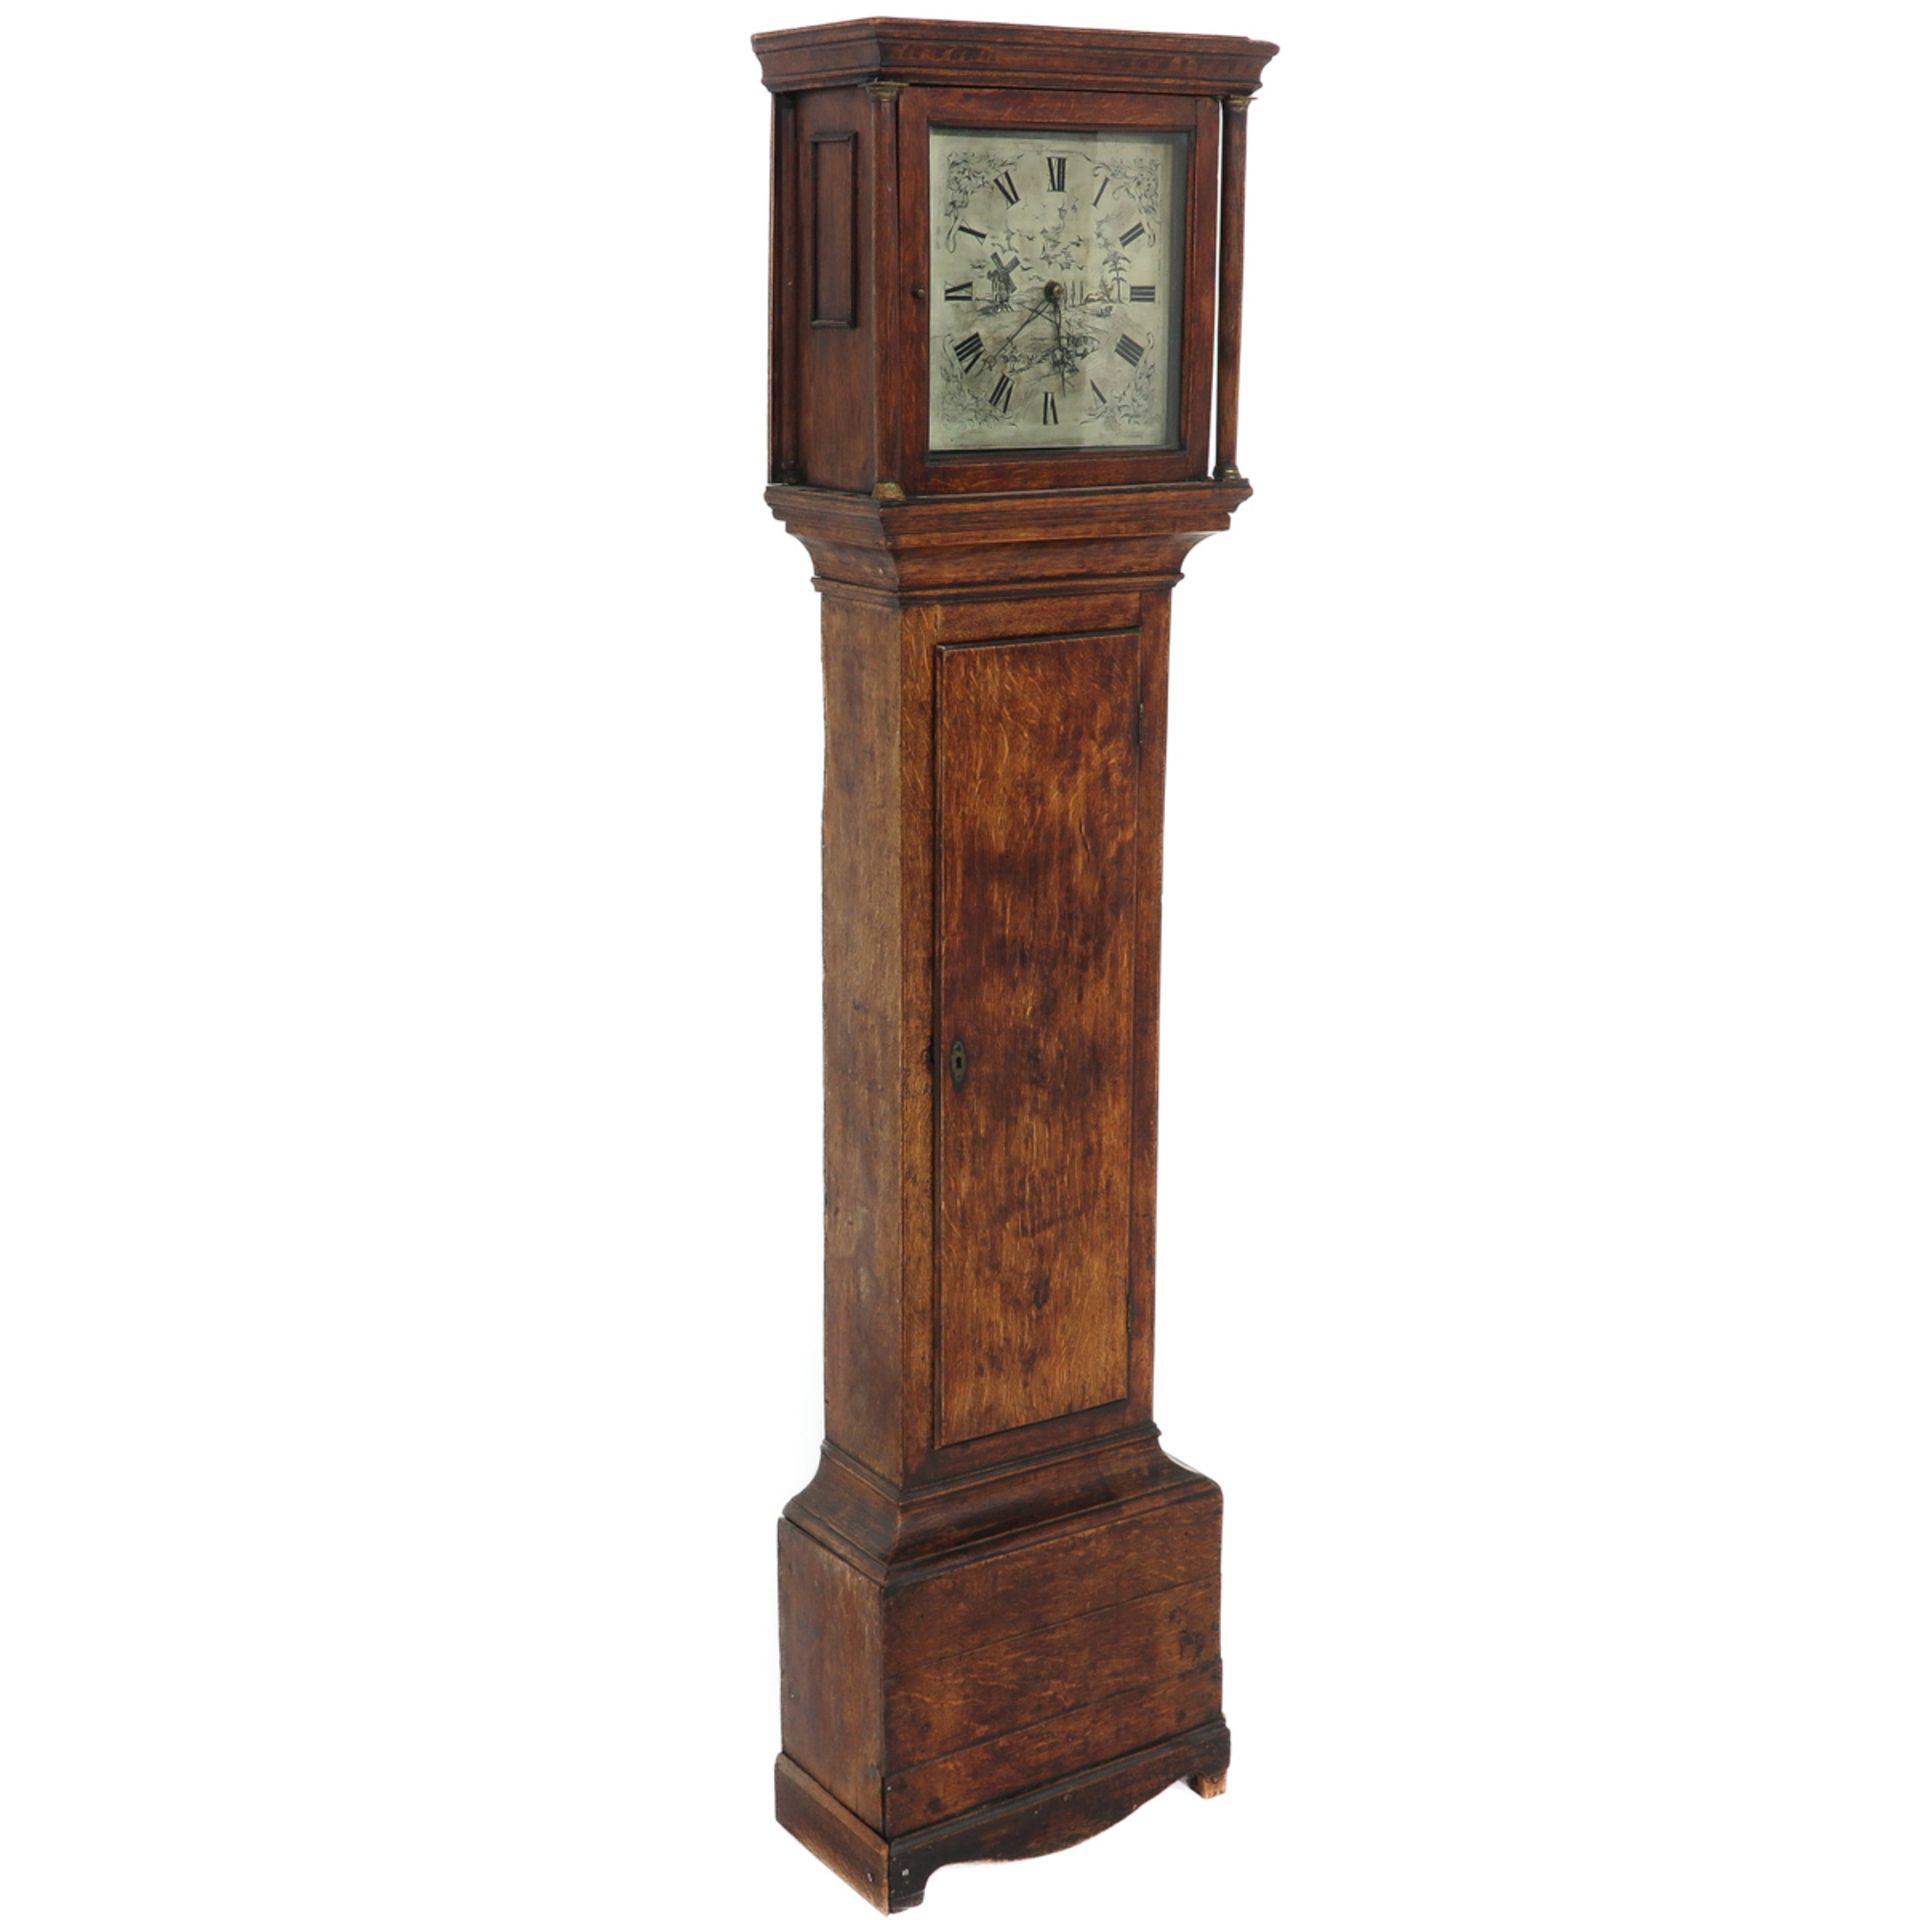 An English Standing Clock - Image 2 of 8